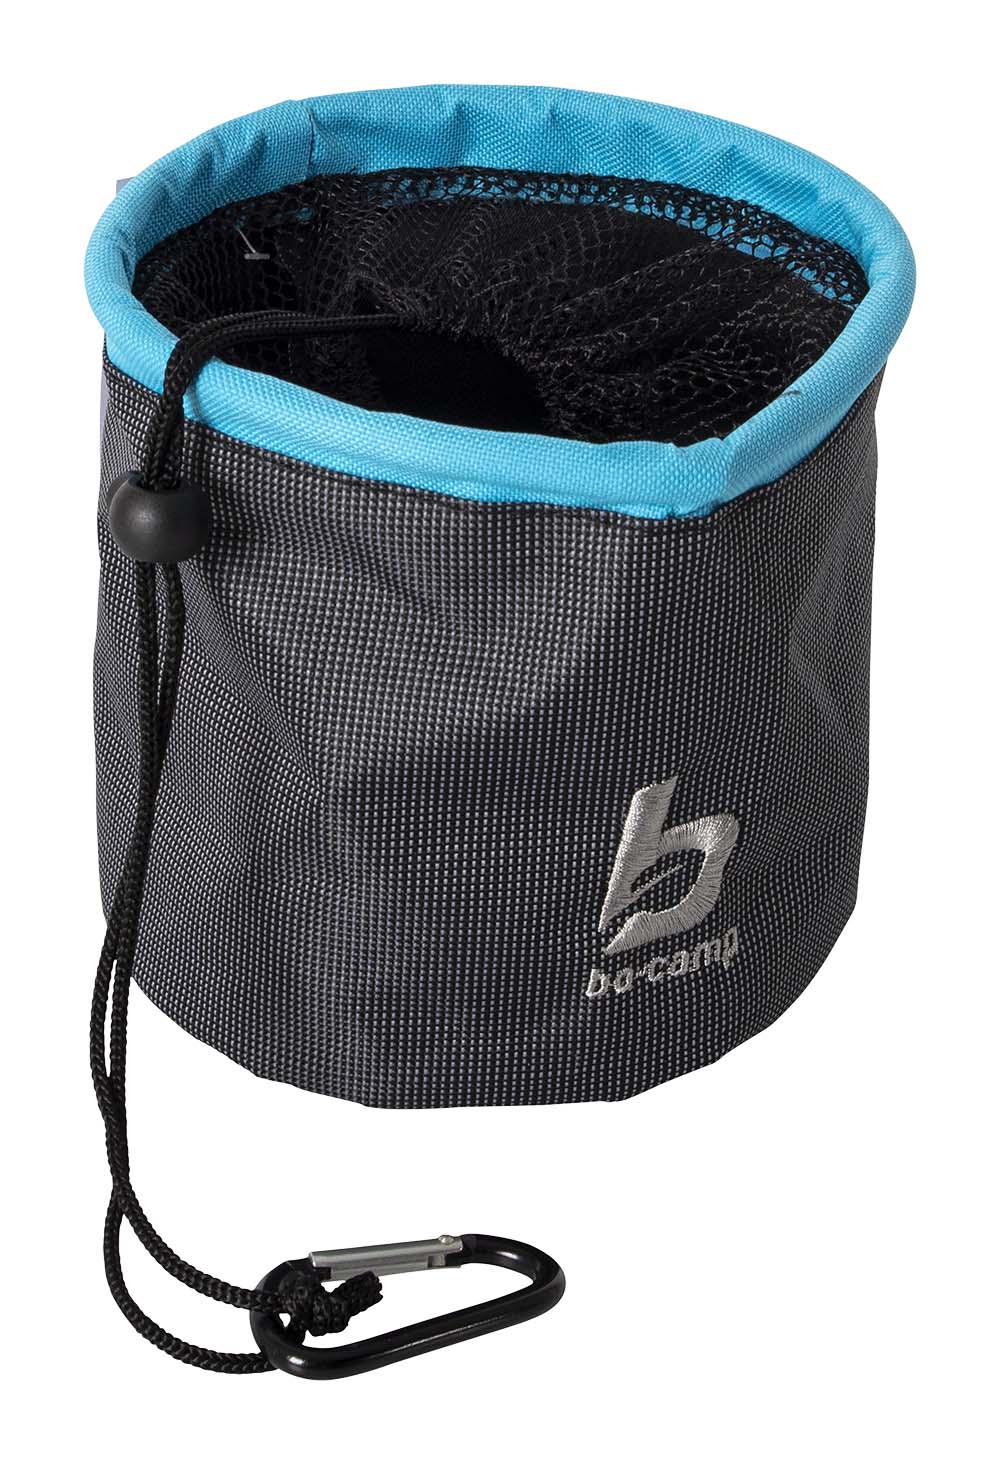 4117380 A handy storage bag for clothespins. Contains a carabiner hook to hang the pouch on, for example, a tumble dryer or drying rack. Made of luxurious two-tone 600D Oxford Polyester.